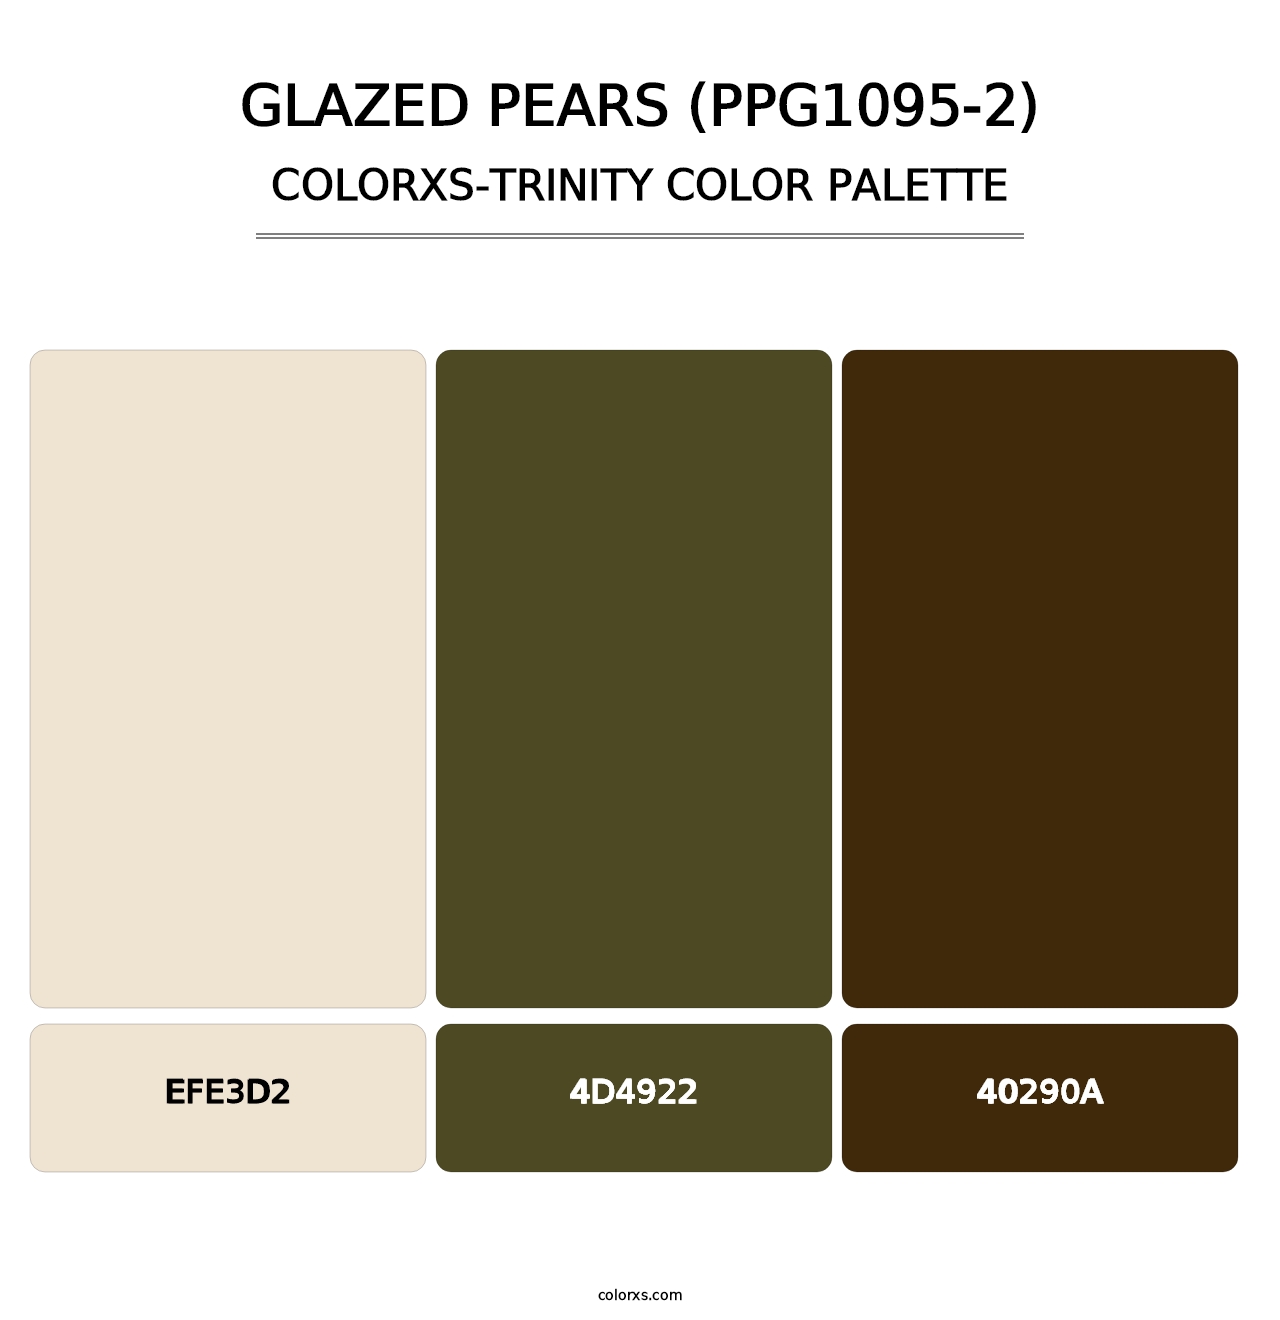 Glazed Pears (PPG1095-2) - Colorxs Trinity Palette